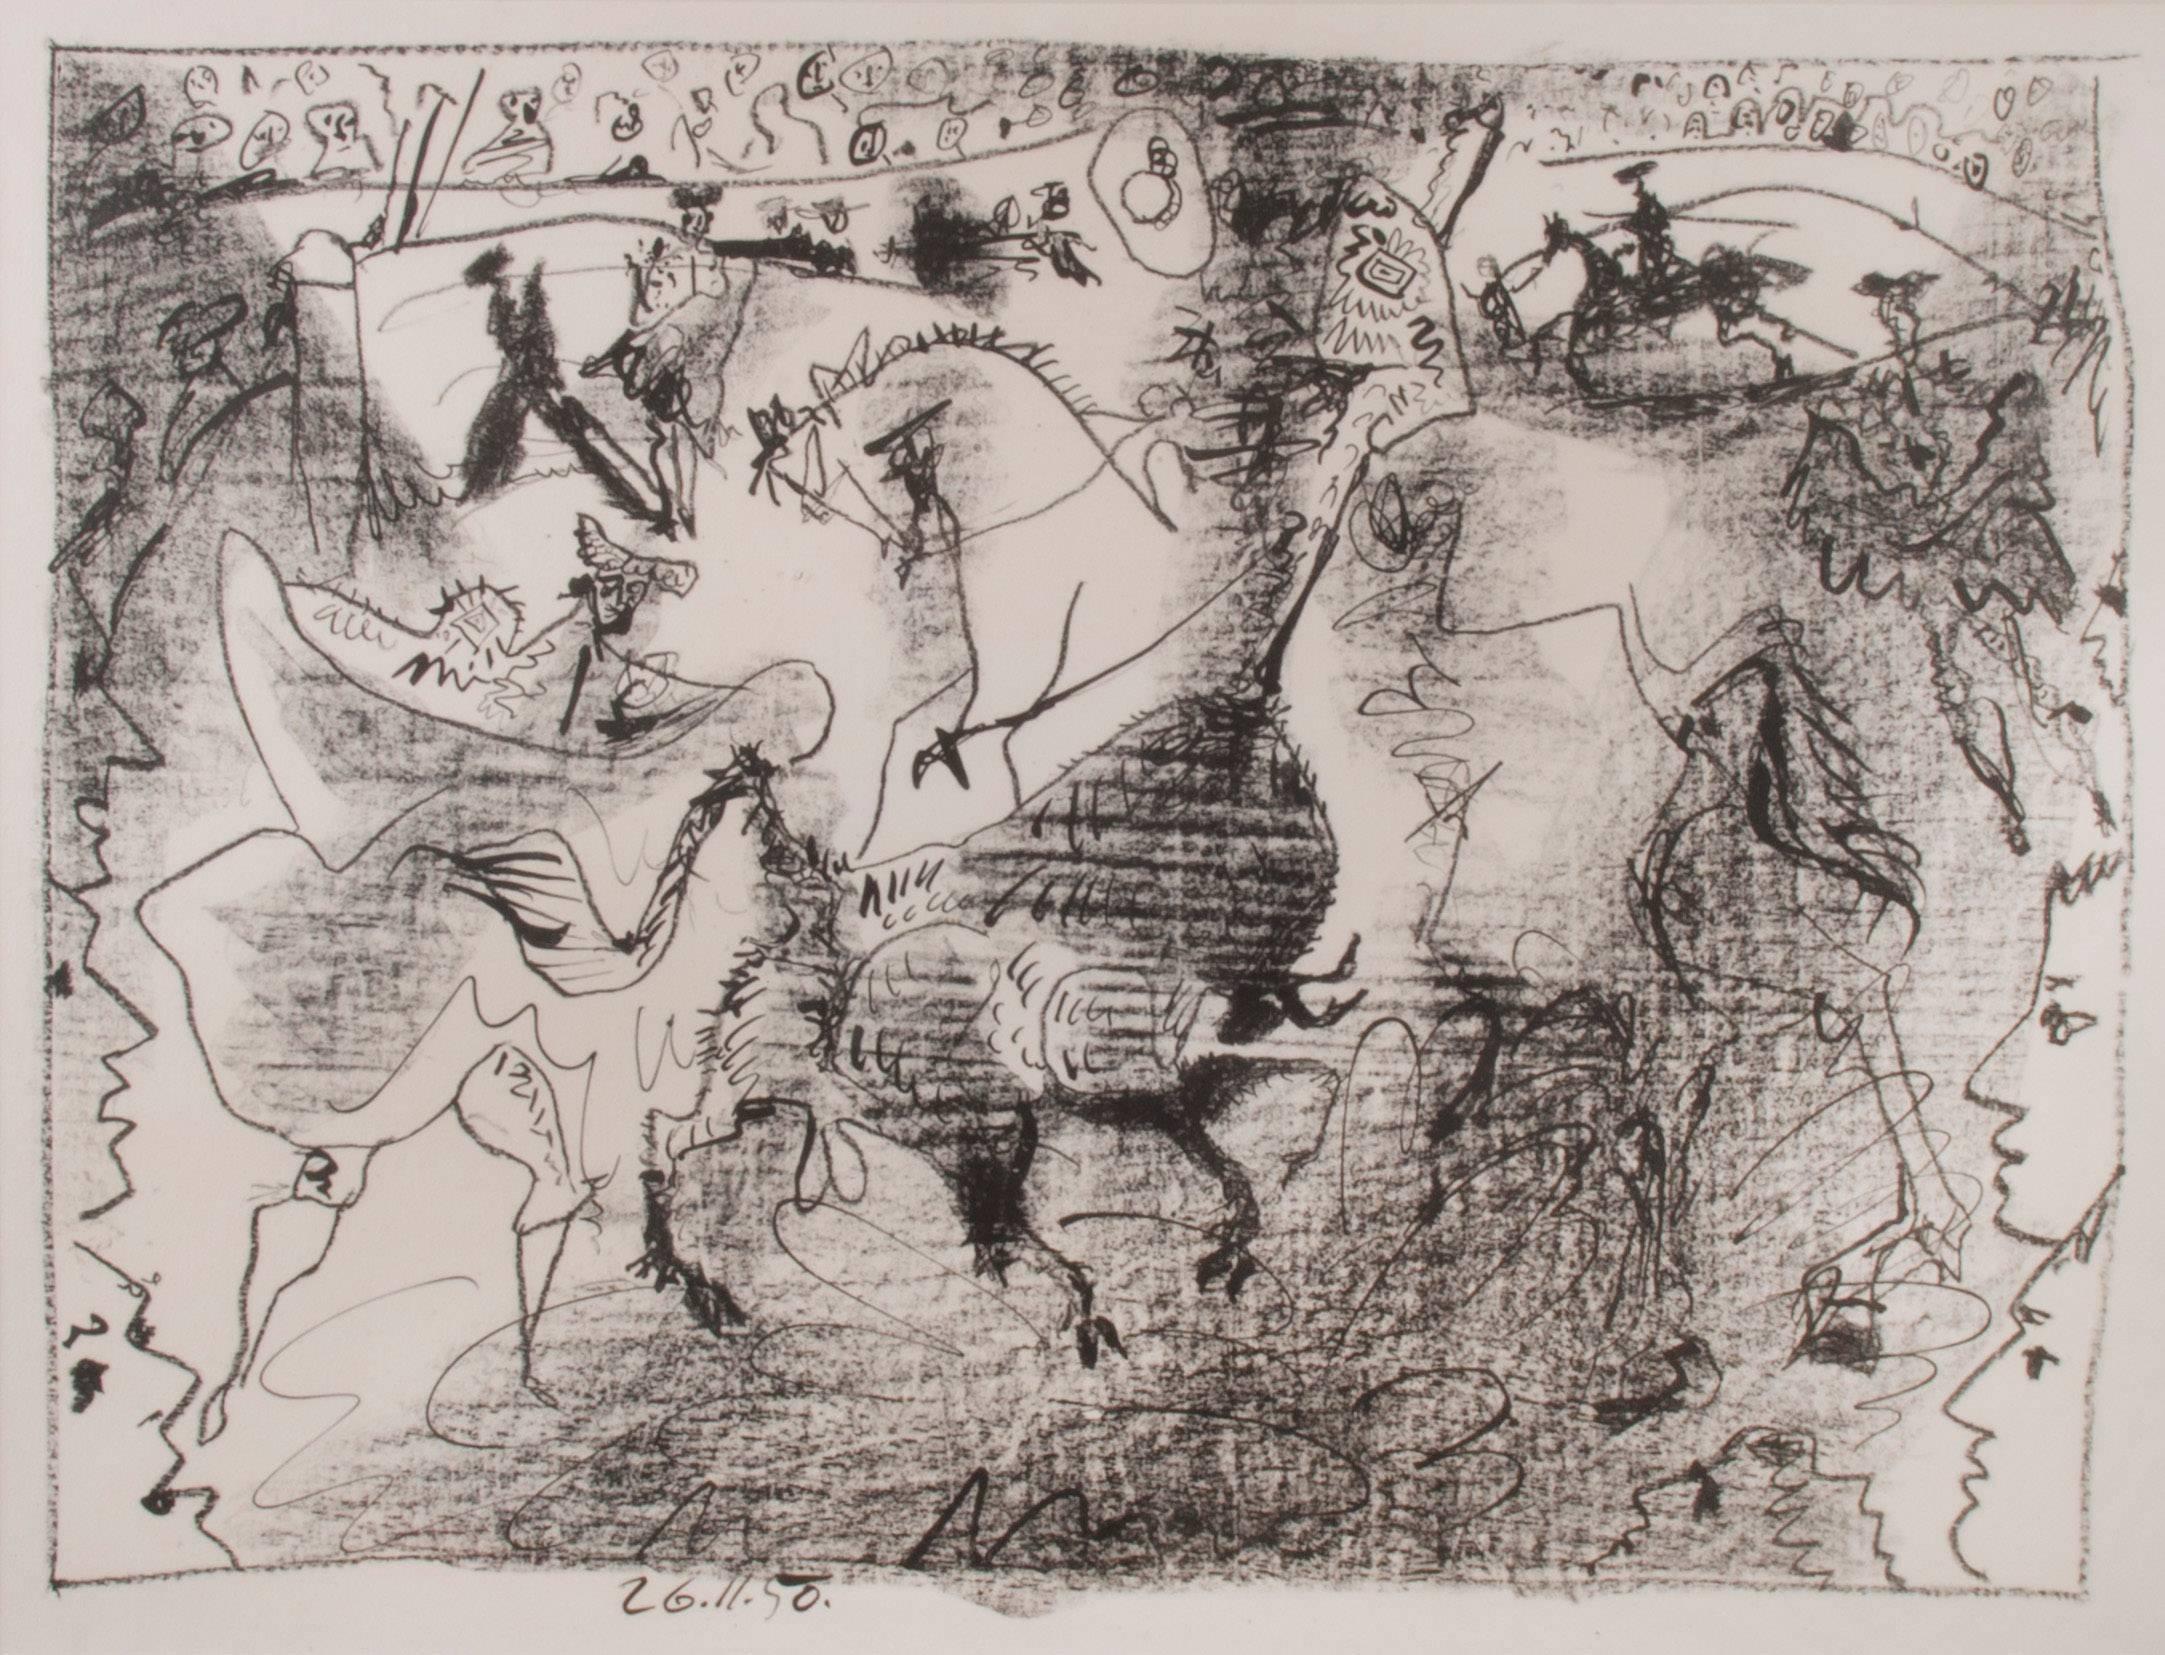 Pablo Picasso Abstract Print - La Pique (The Pike)